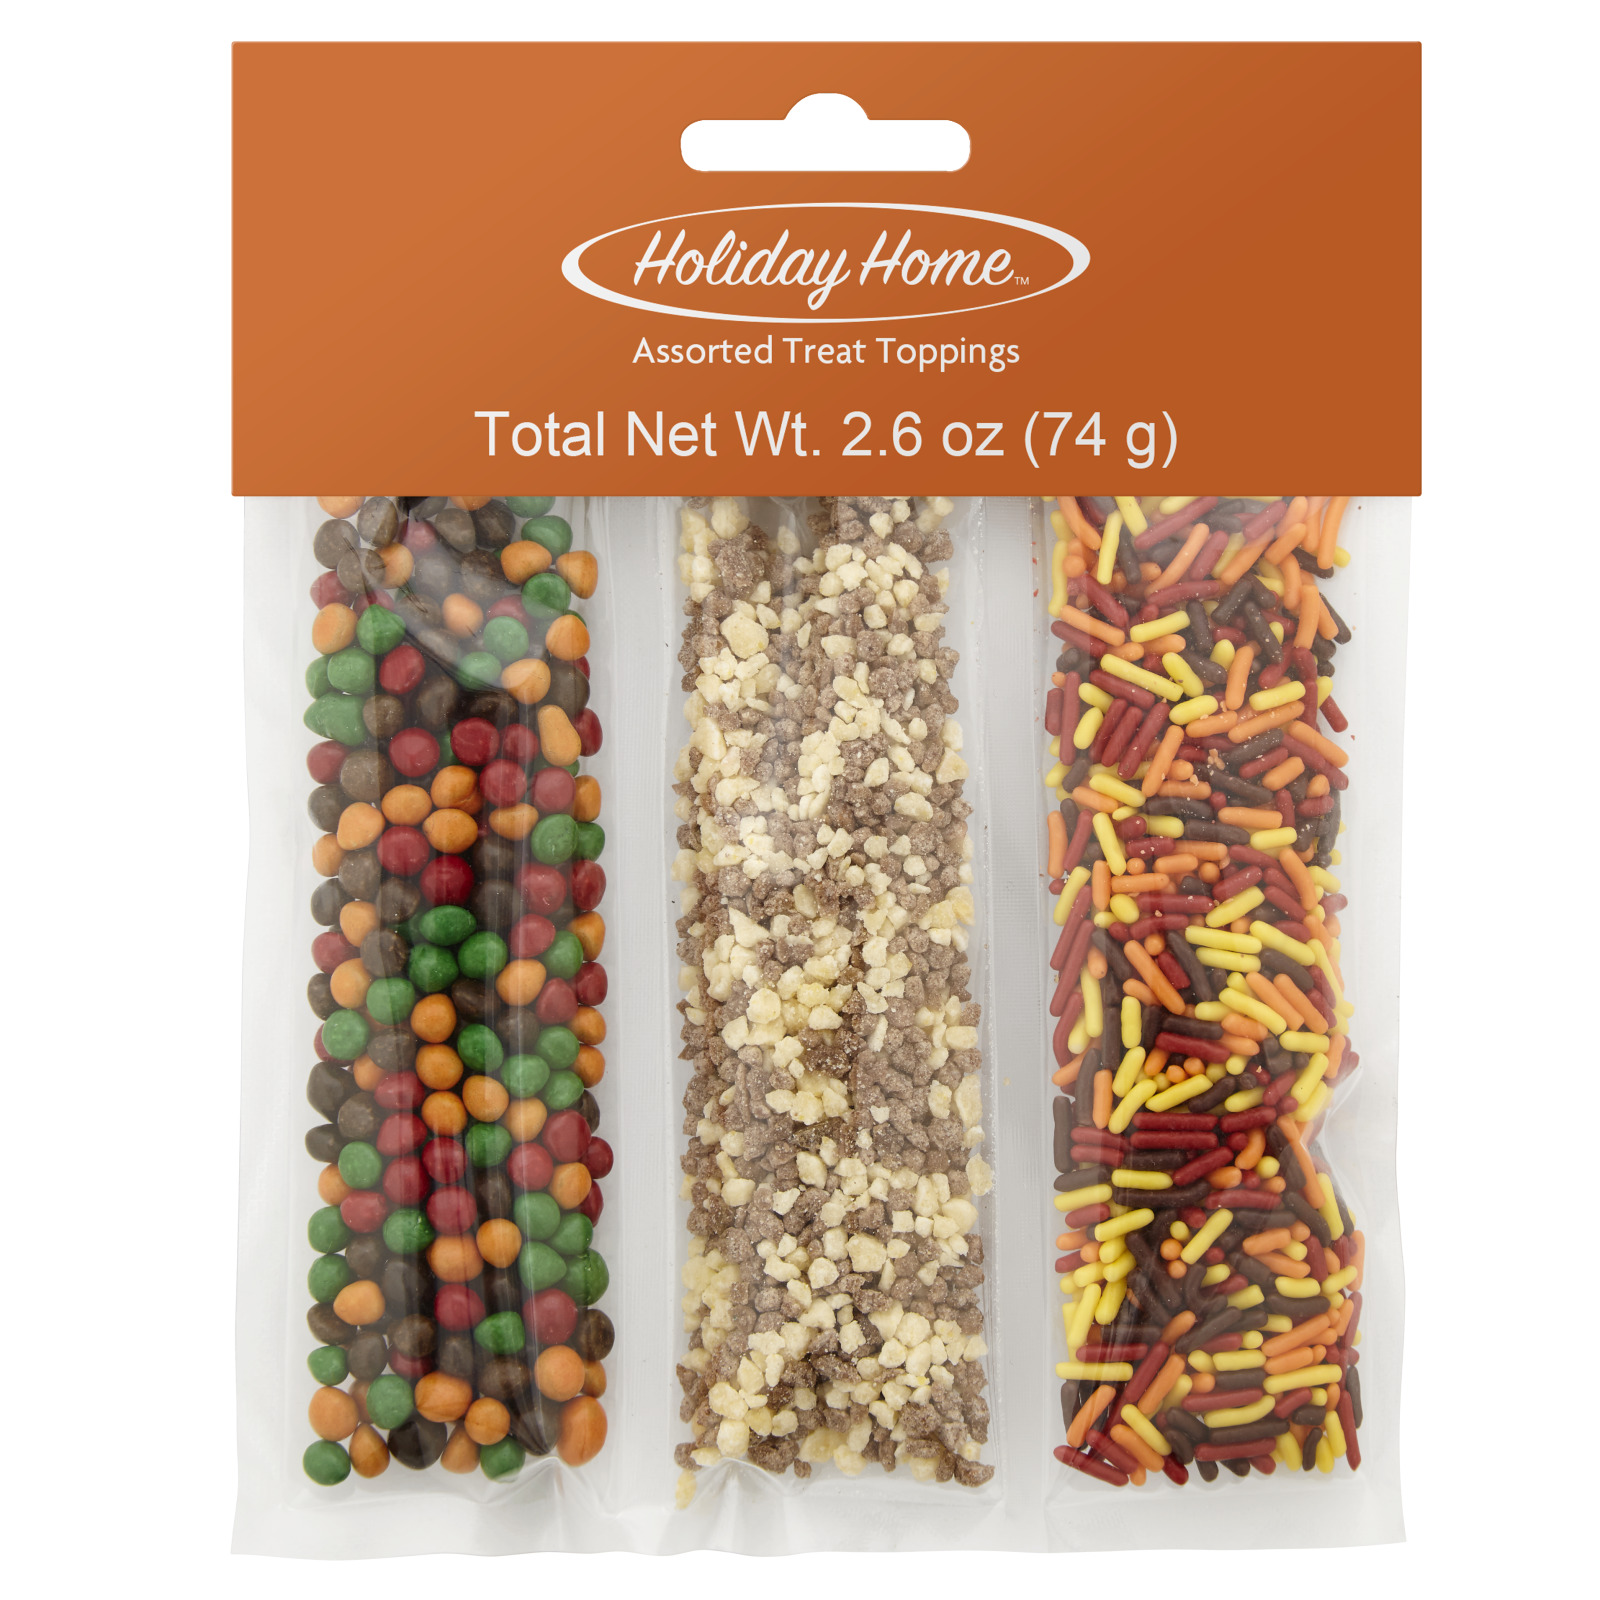 Holiday Home Assorted Treat Toppings, Item # 710-0-0207